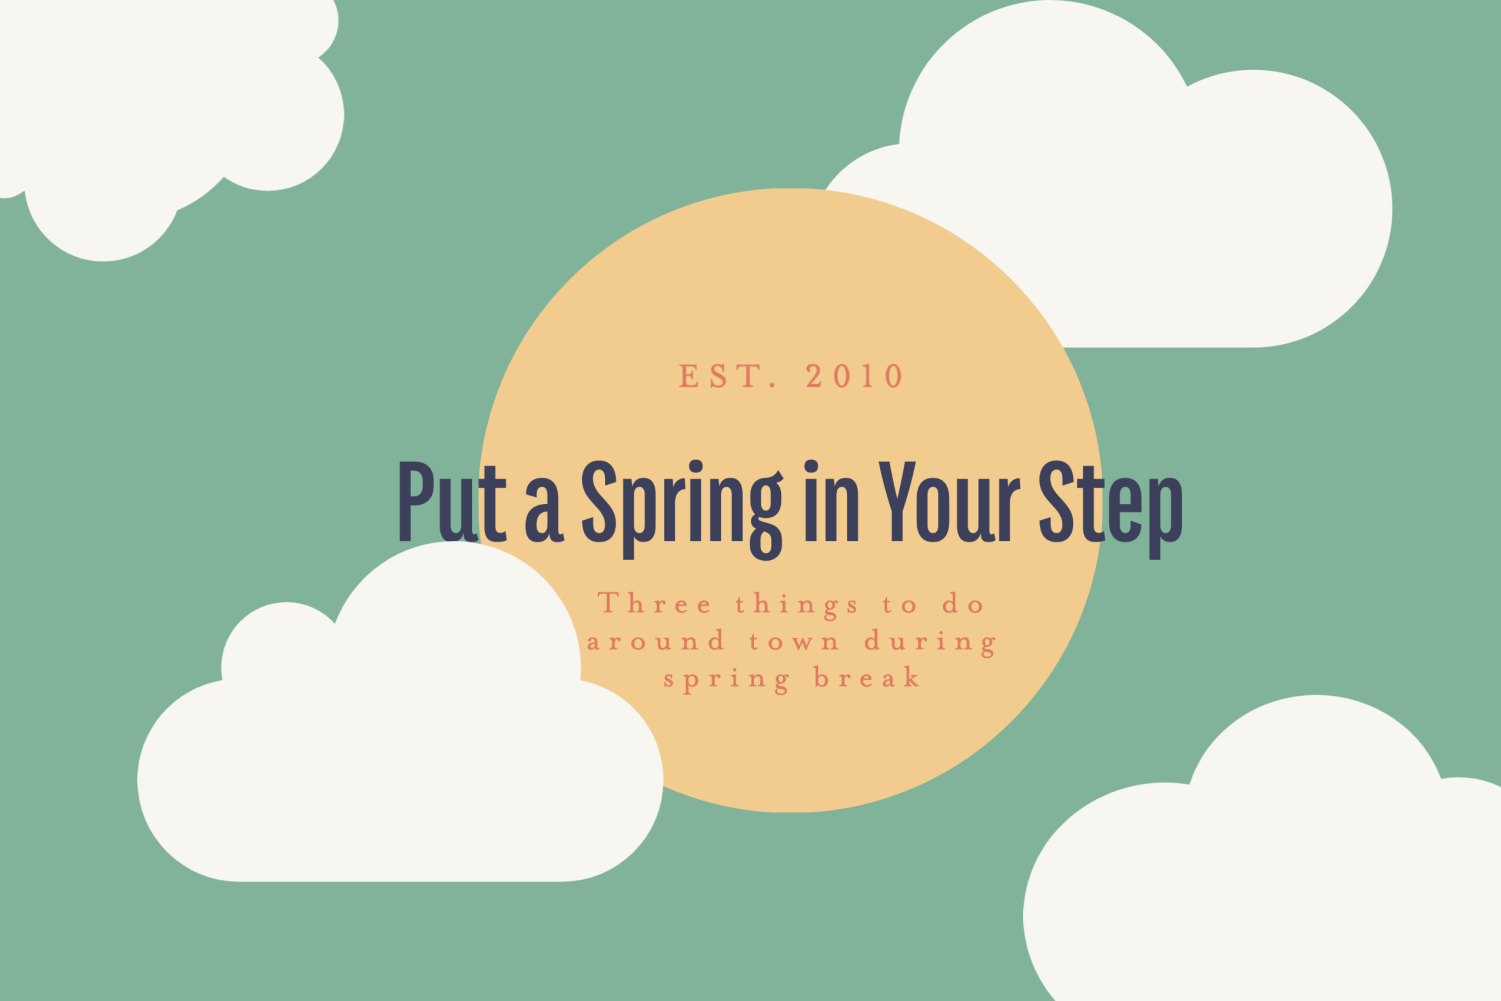 Put a Spring in Your Step